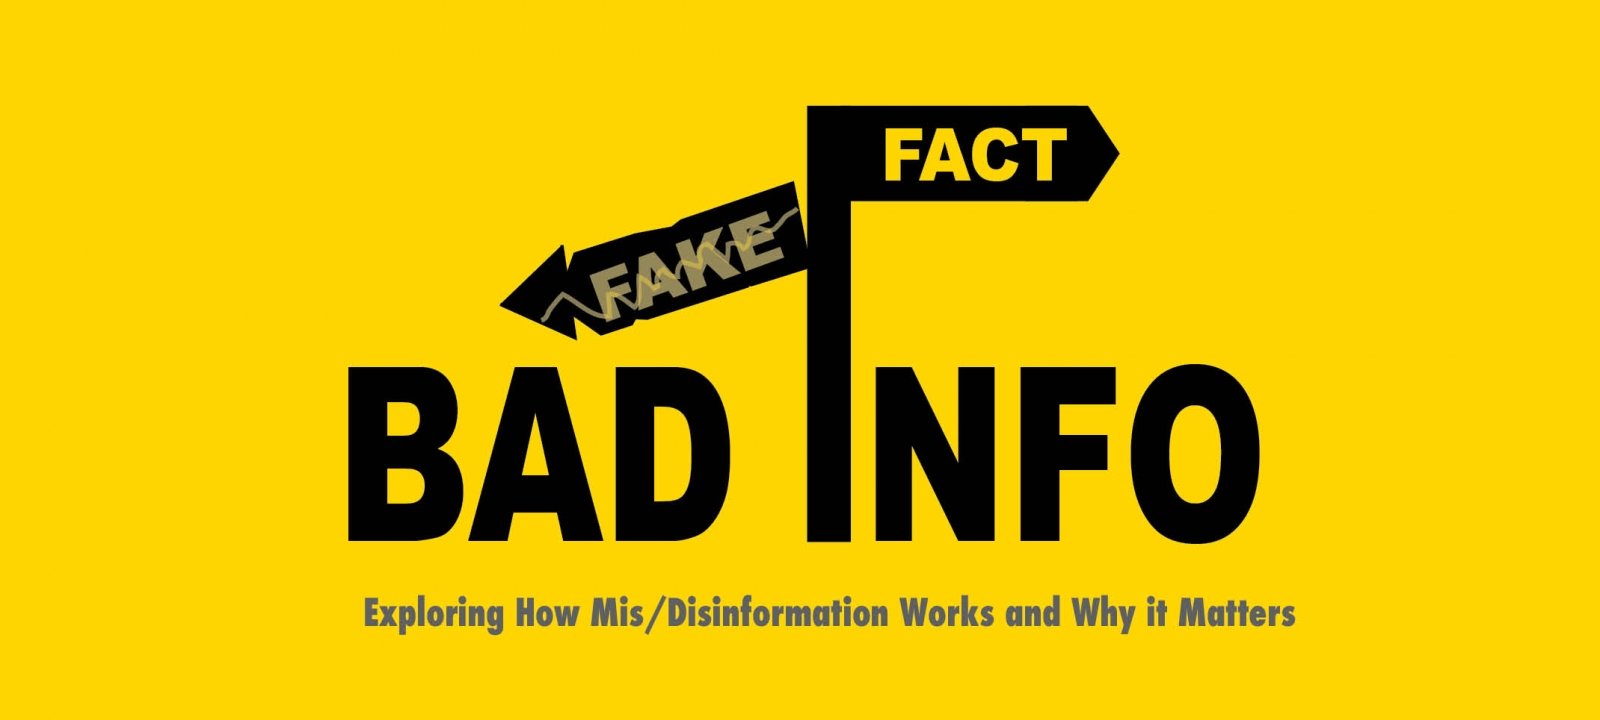 Bad Information Banner. Exploring How Mis/Disinformation Works and Why it Matters.